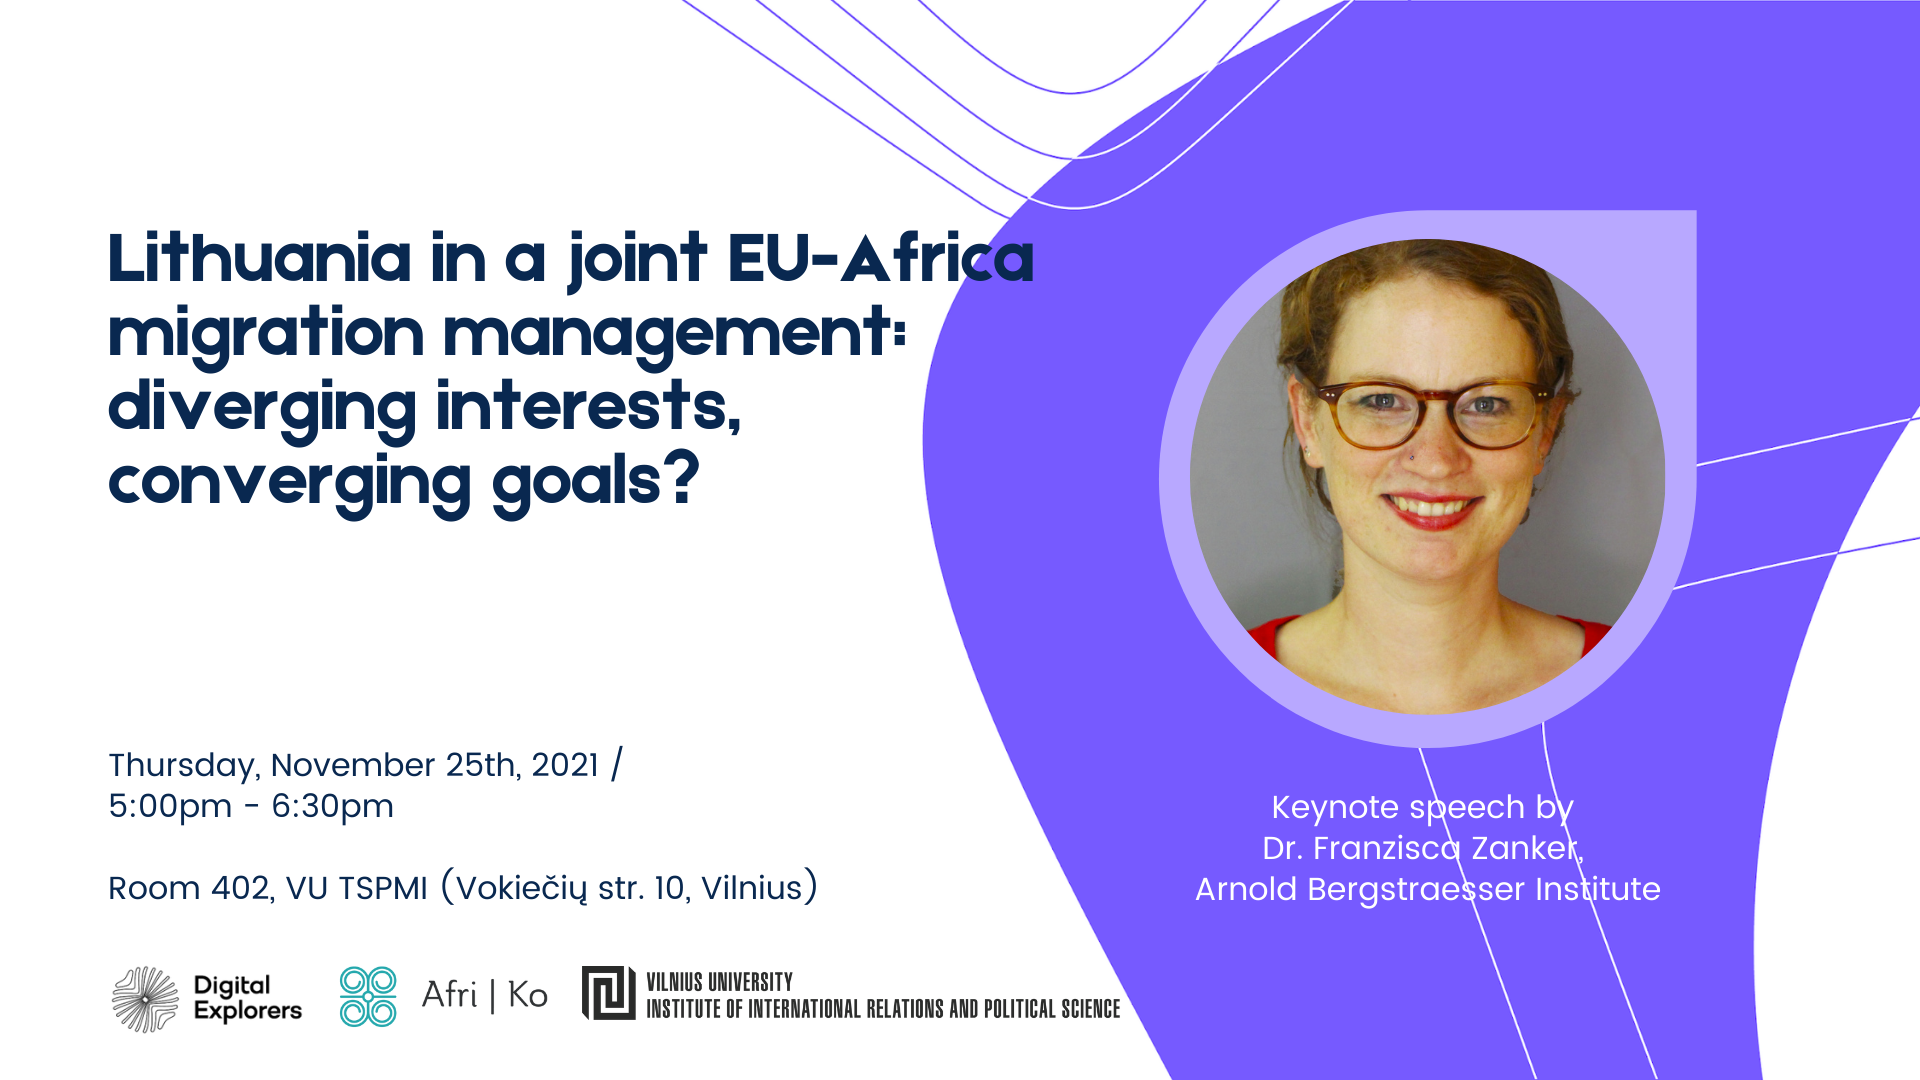 Lithuania in a joint EU-Africa migration management: diverging interests, converging goals?